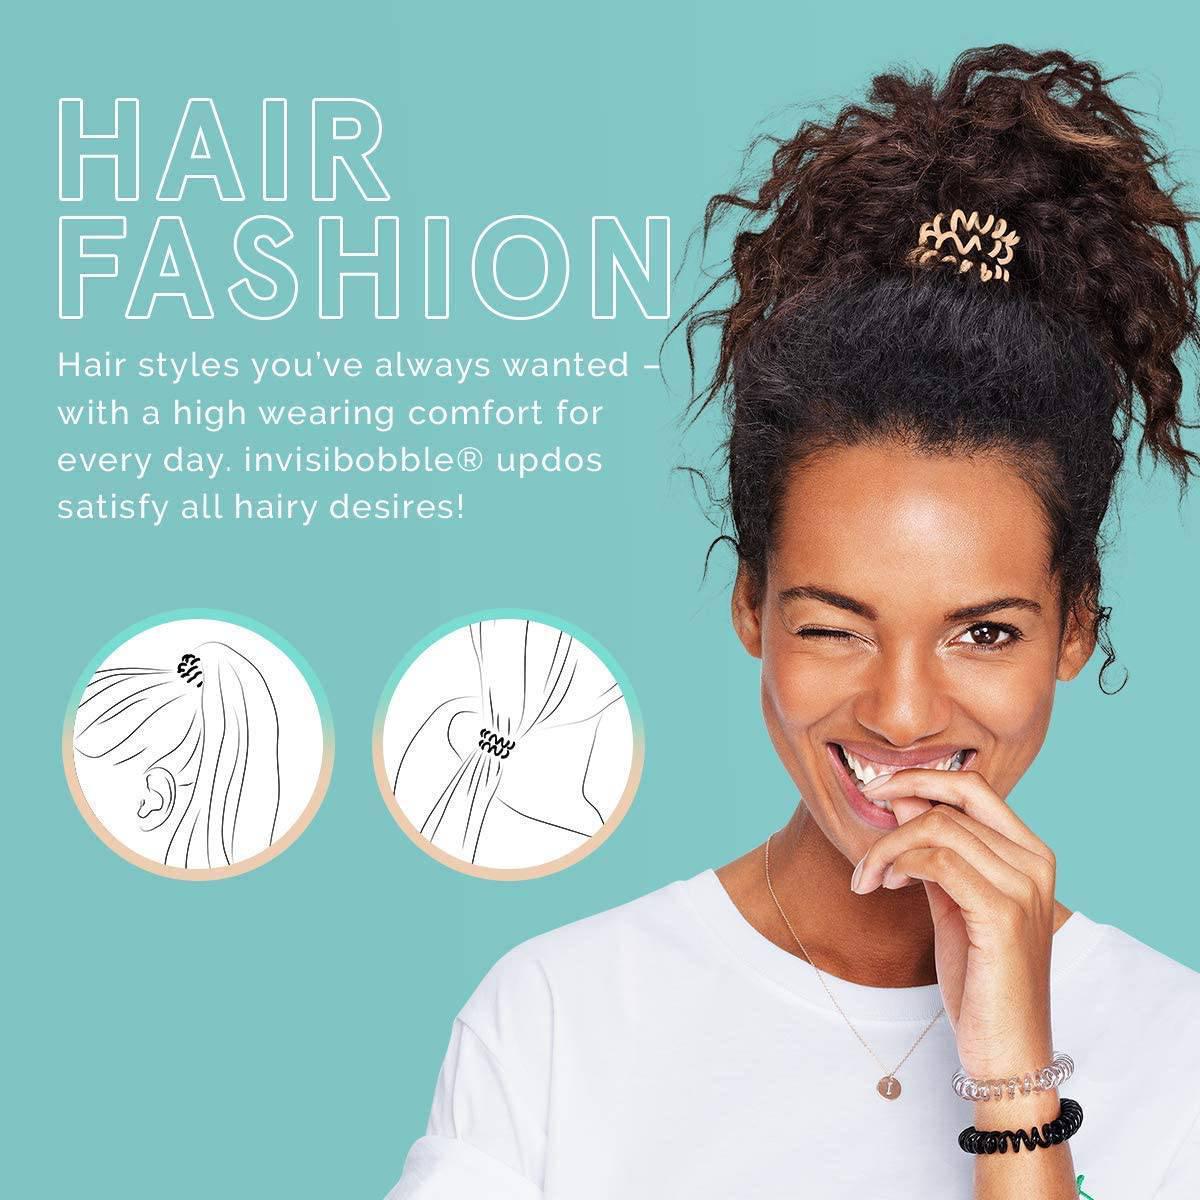 Invisibobble ORIGINAL Hair Ties, Mint To Be, 3 Pack - Traceless, Strong Hold, Waterproof - Suitable for All Hair Types - Healthxpress.ie